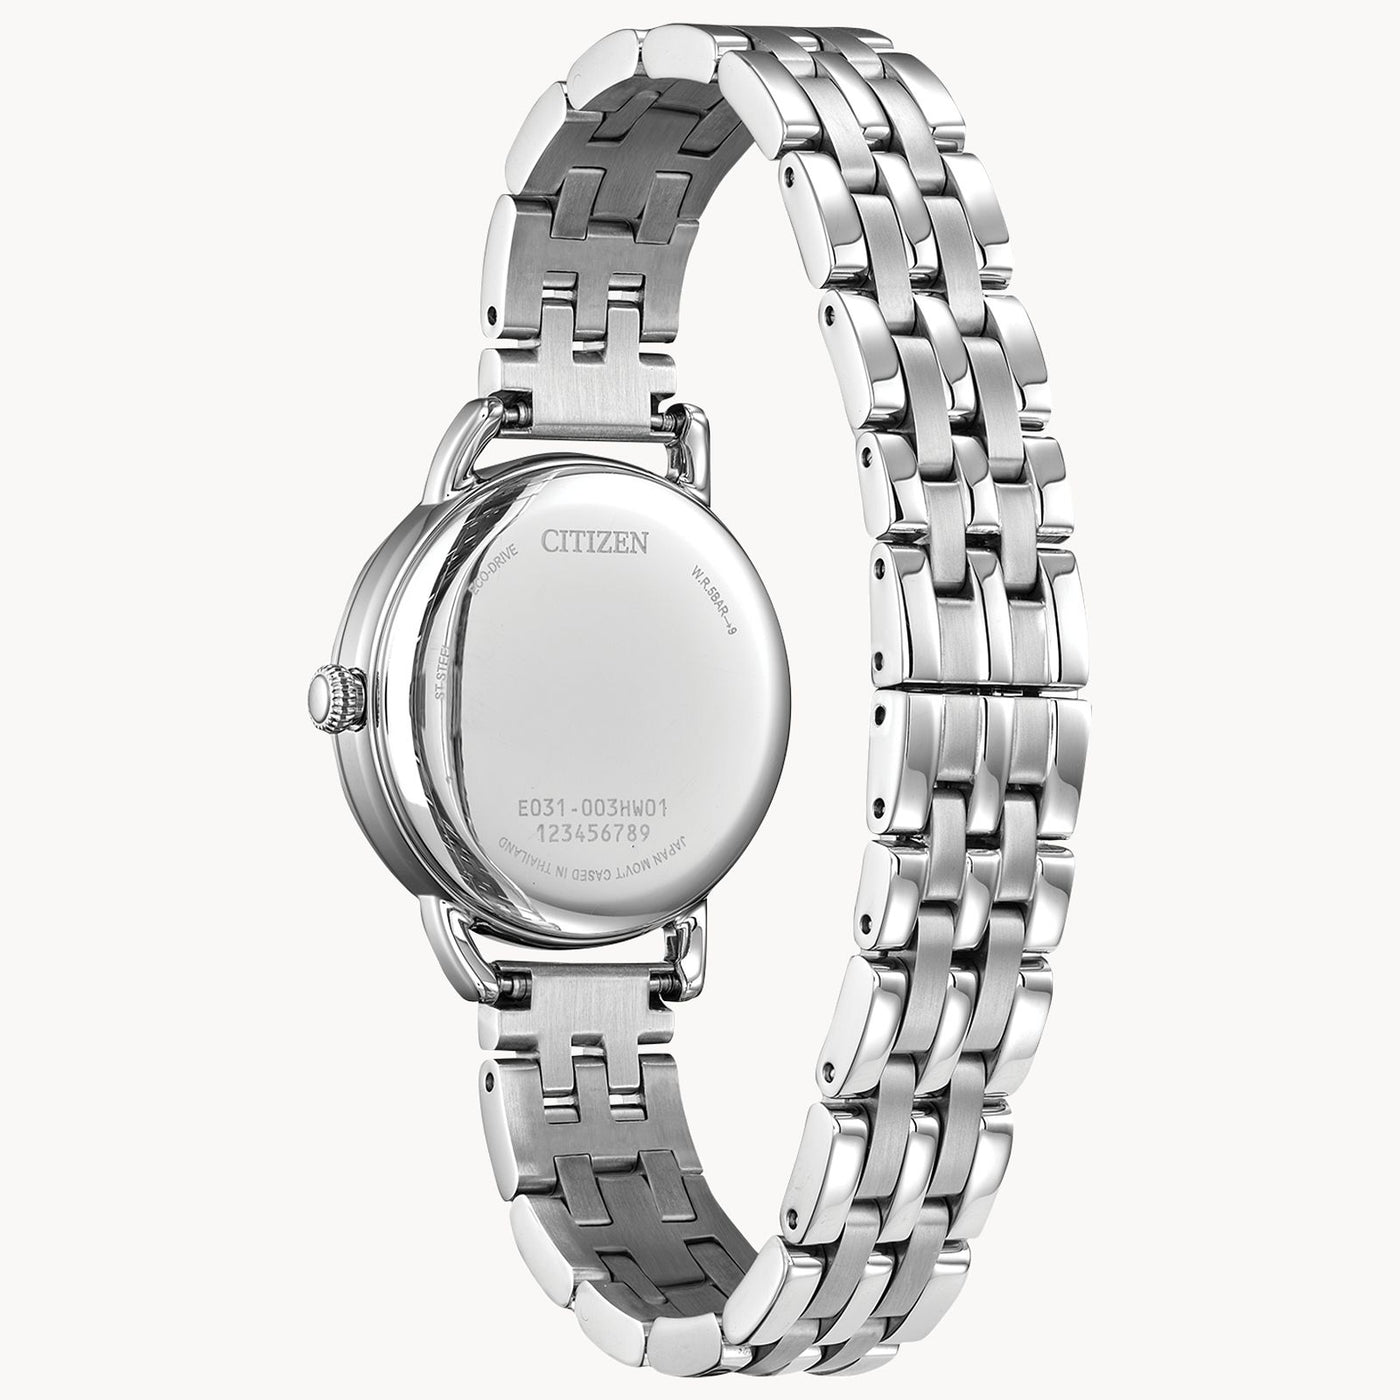 Citizen Eco-Drive Coin Edge Bezel Watch with a Silver Dial and Roman Numerals